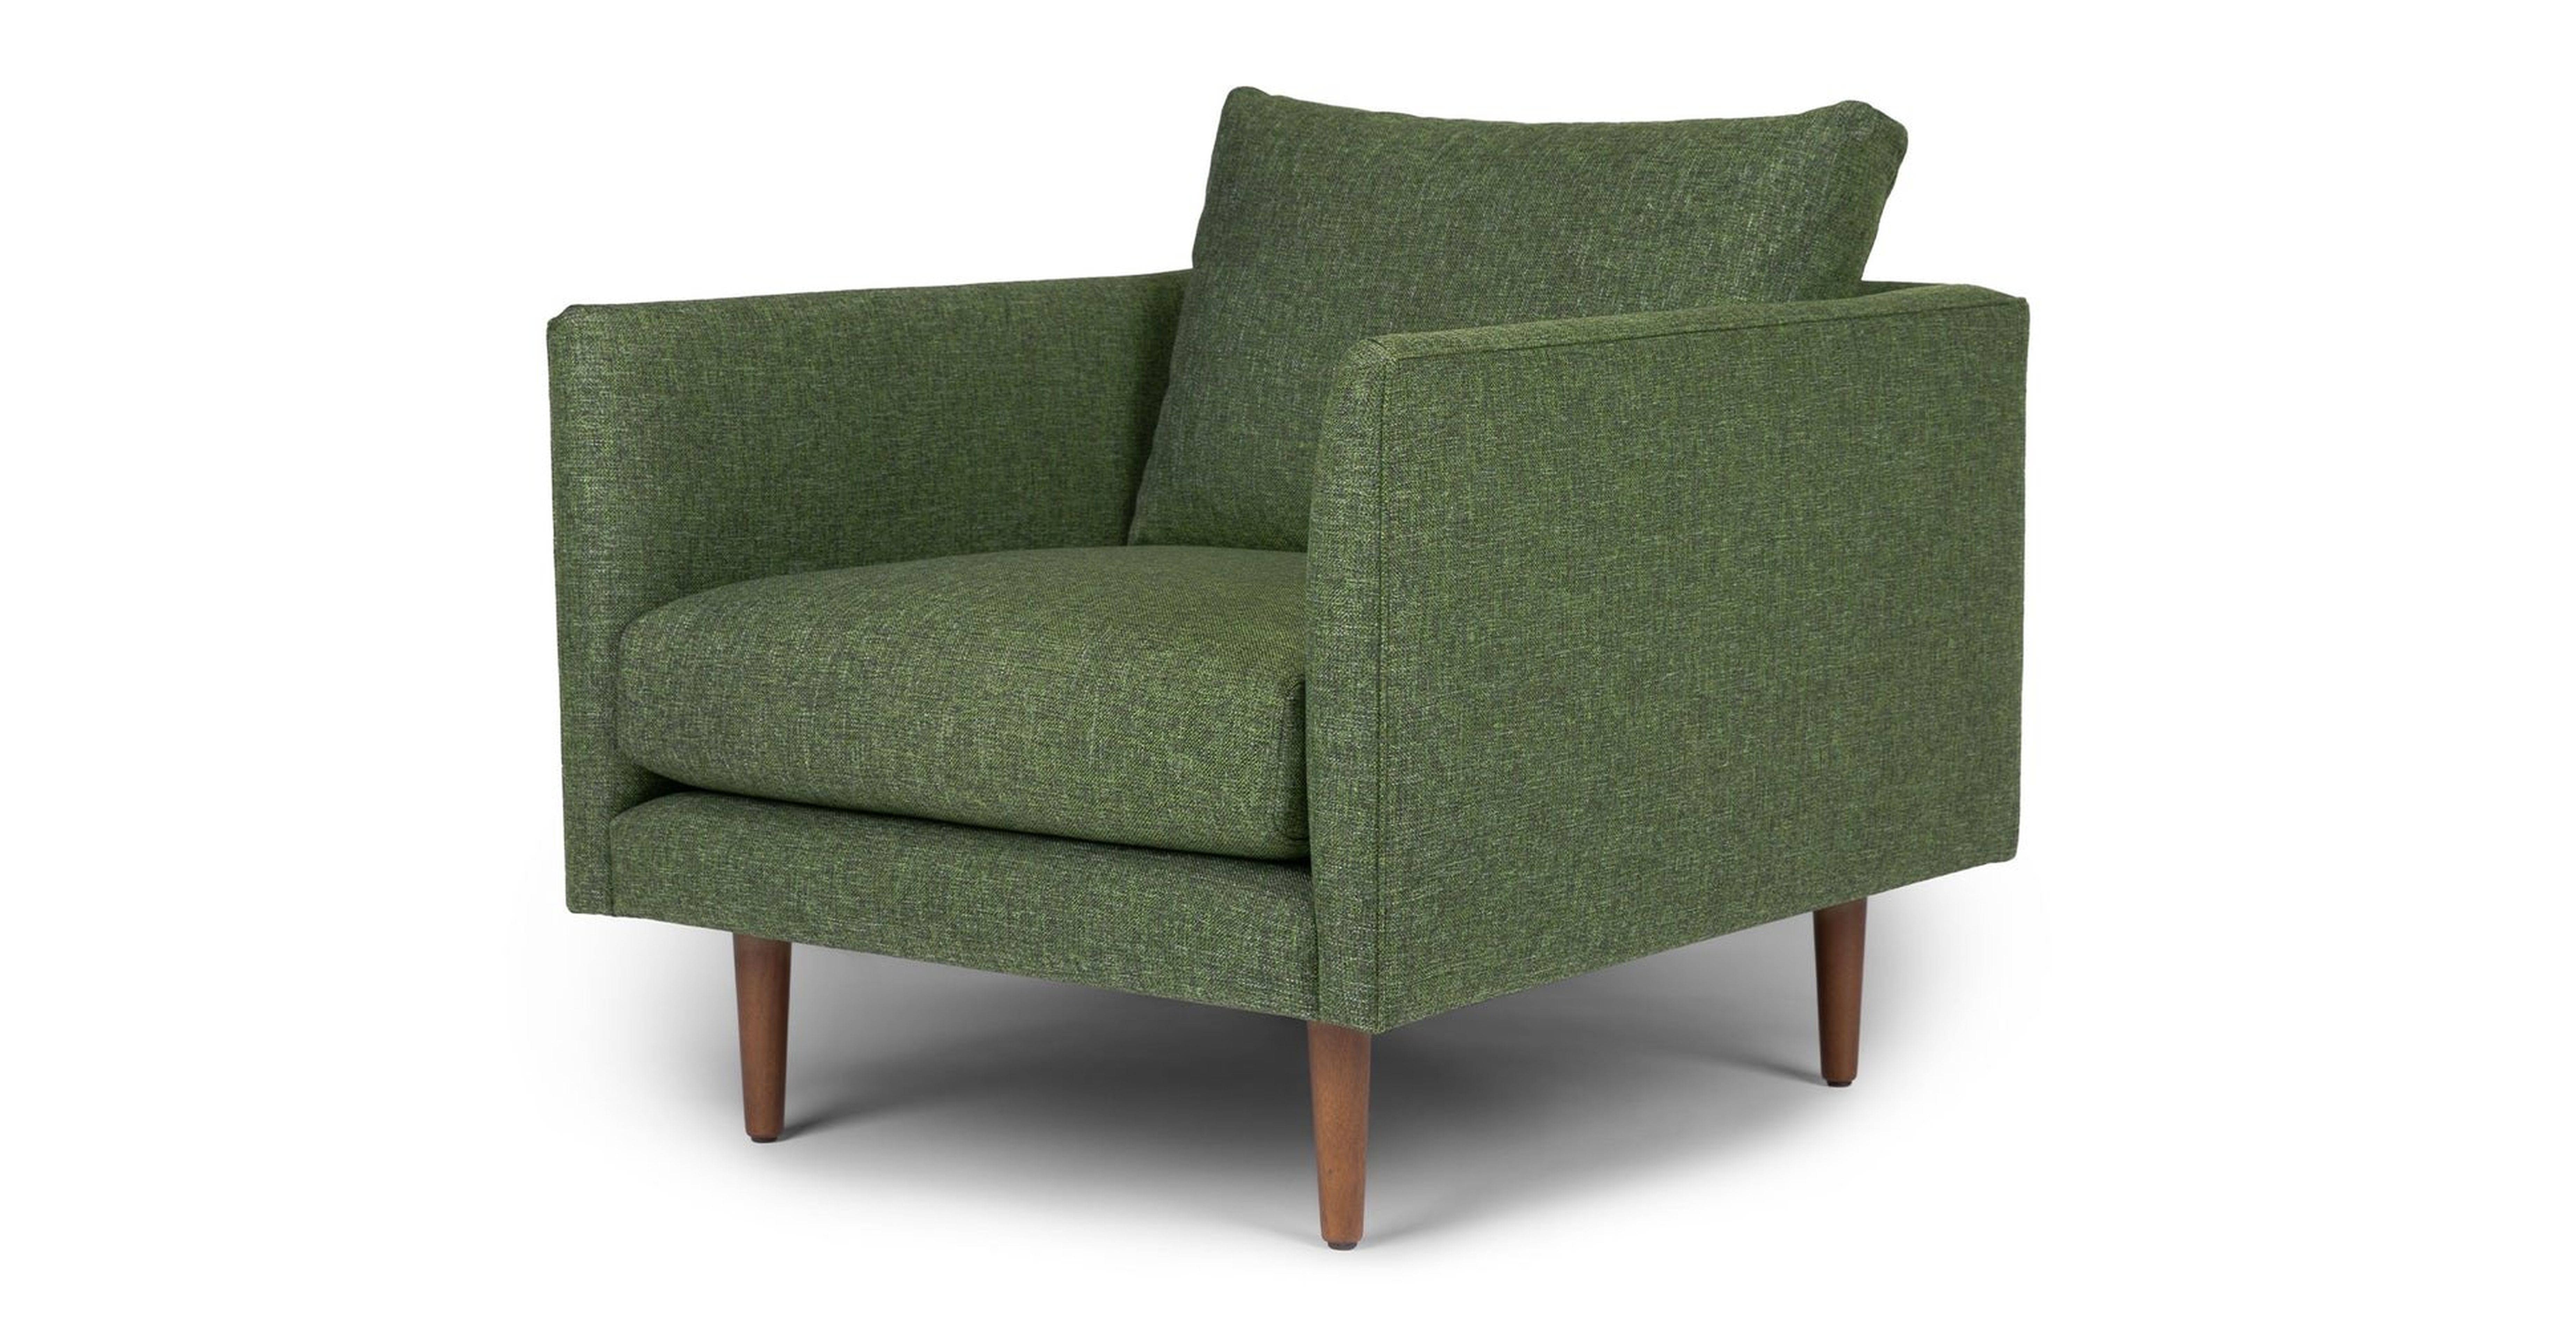 Burrard Forest Green Chair - Article